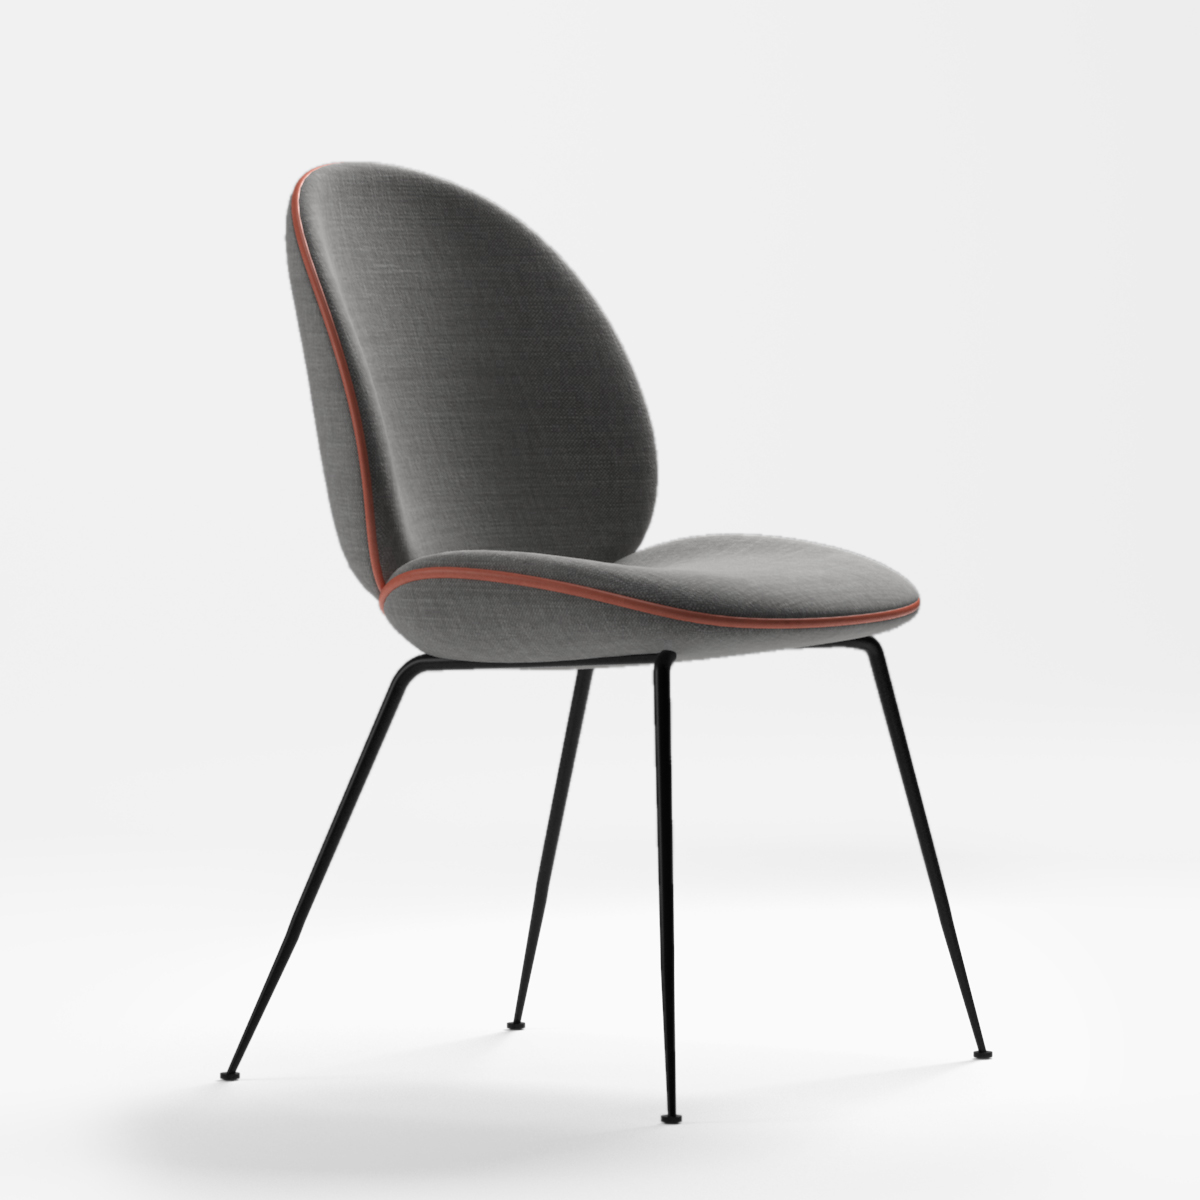 Chair 3ds Max model ch445